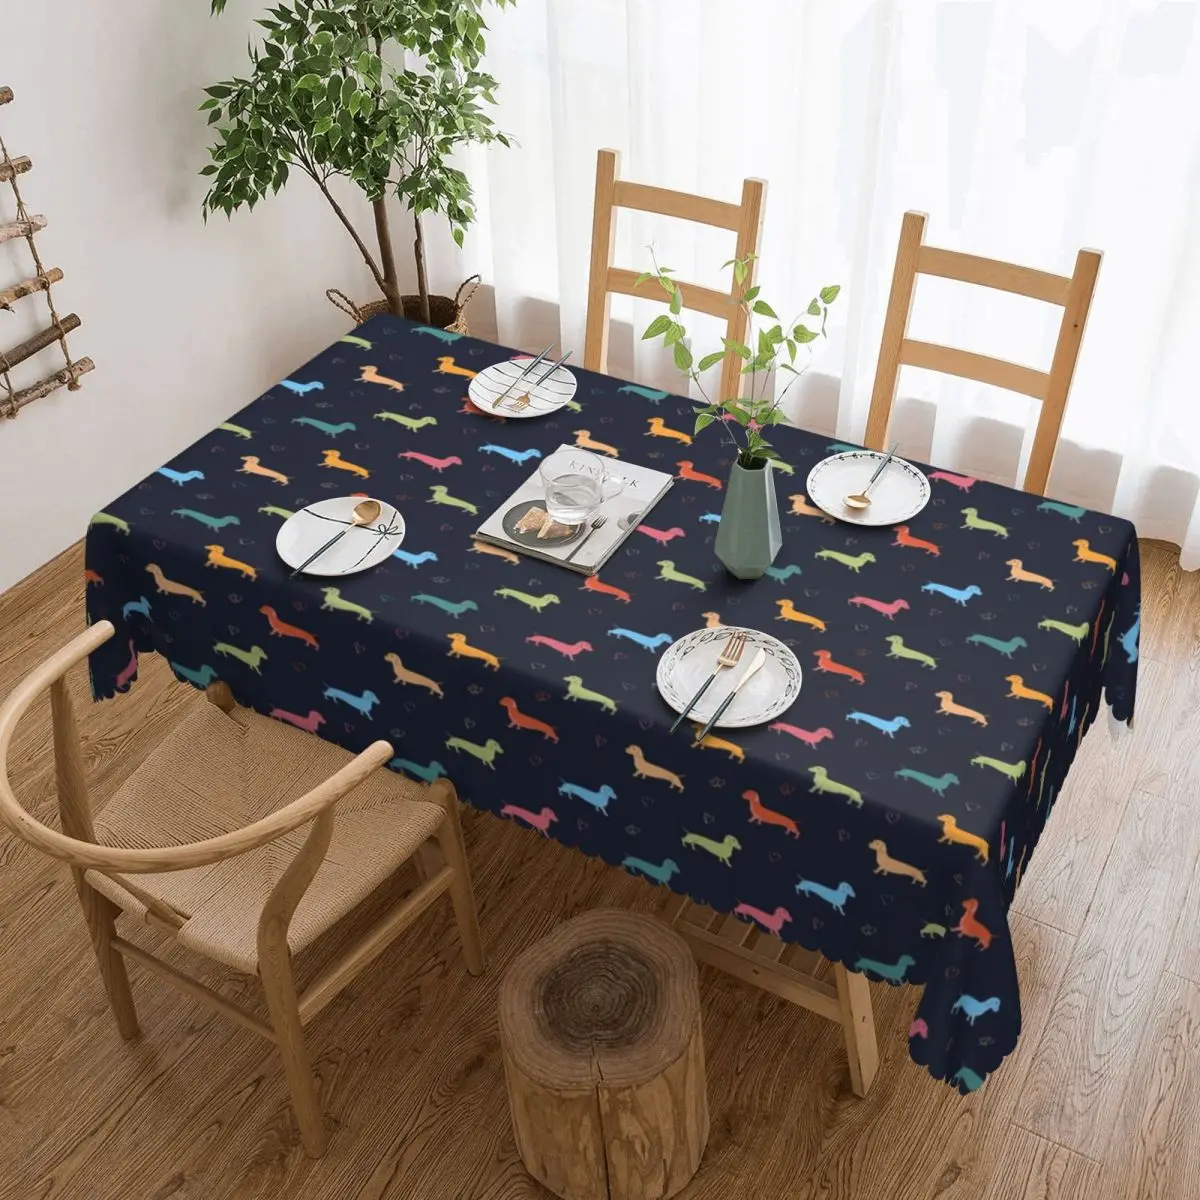 

Multicolour Sausage Dog And Hearts Tablecloth Rectangular Oilproof Dachshund Badger Puppy Table Cover Cloth for Kitchen